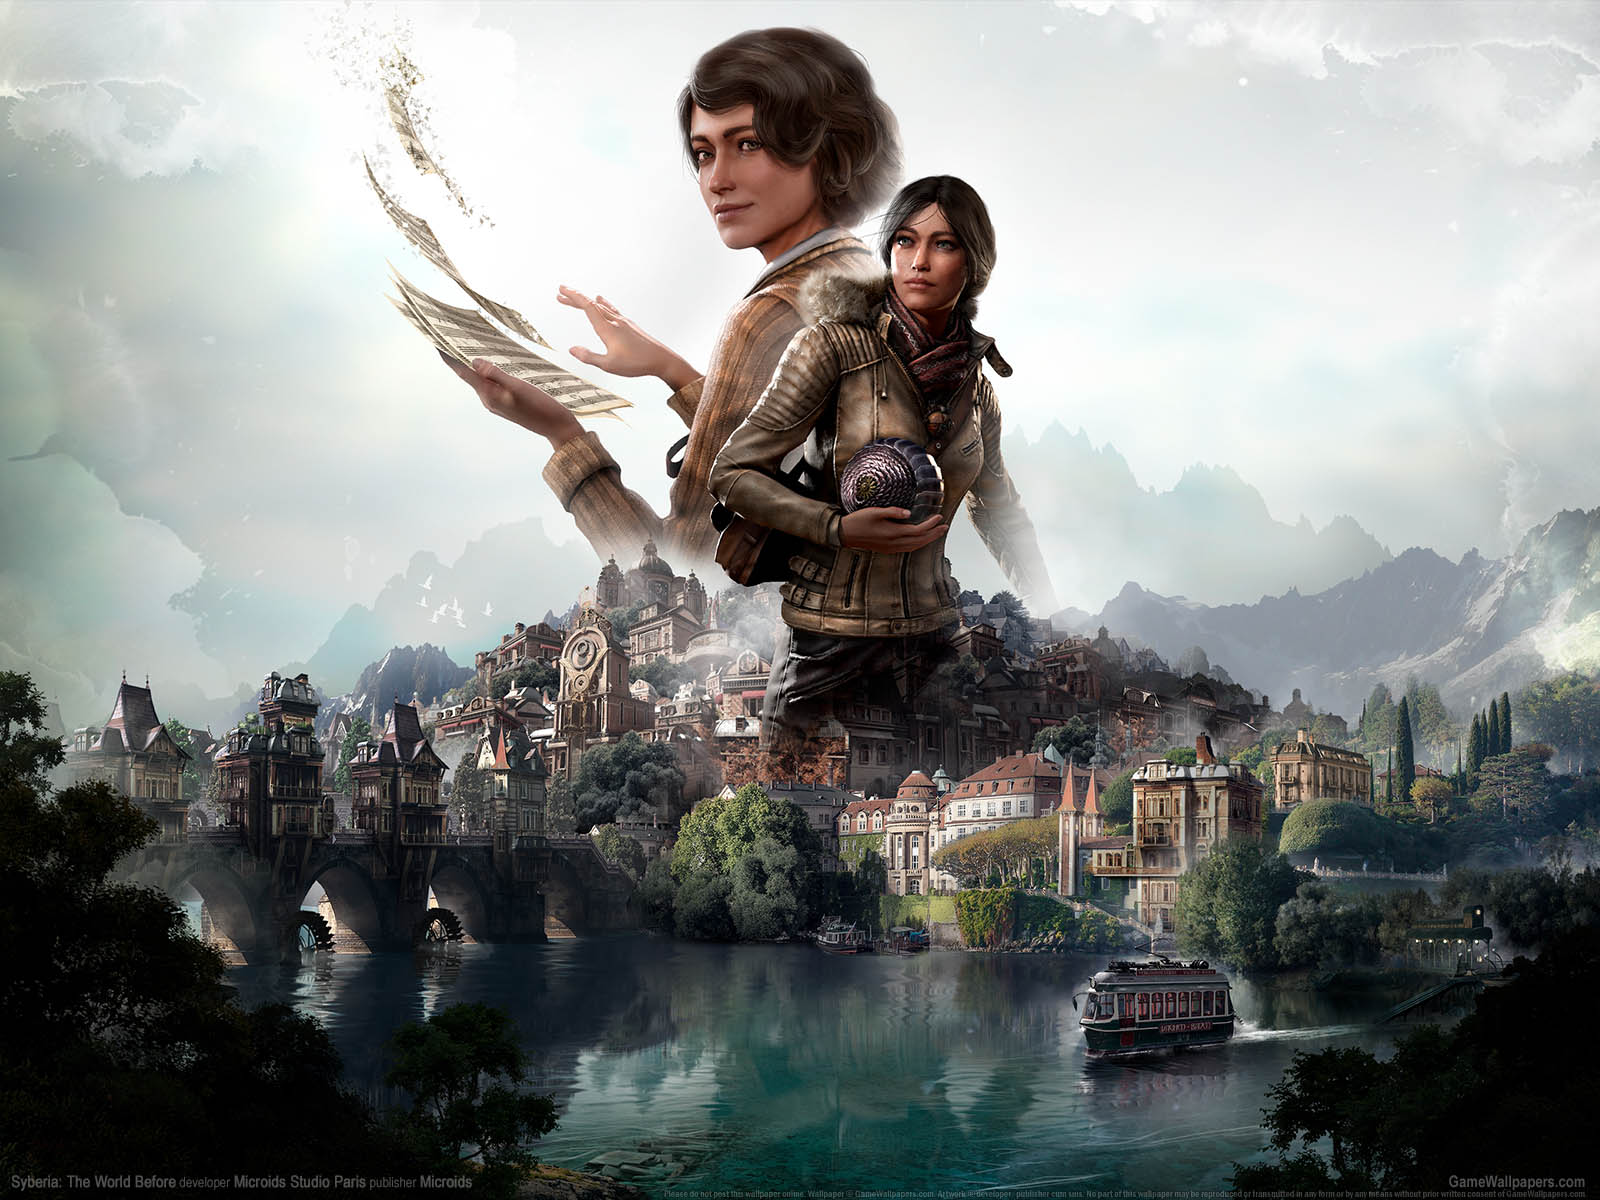 Syberia%3A The World Before wallpaper 01 1600x1200